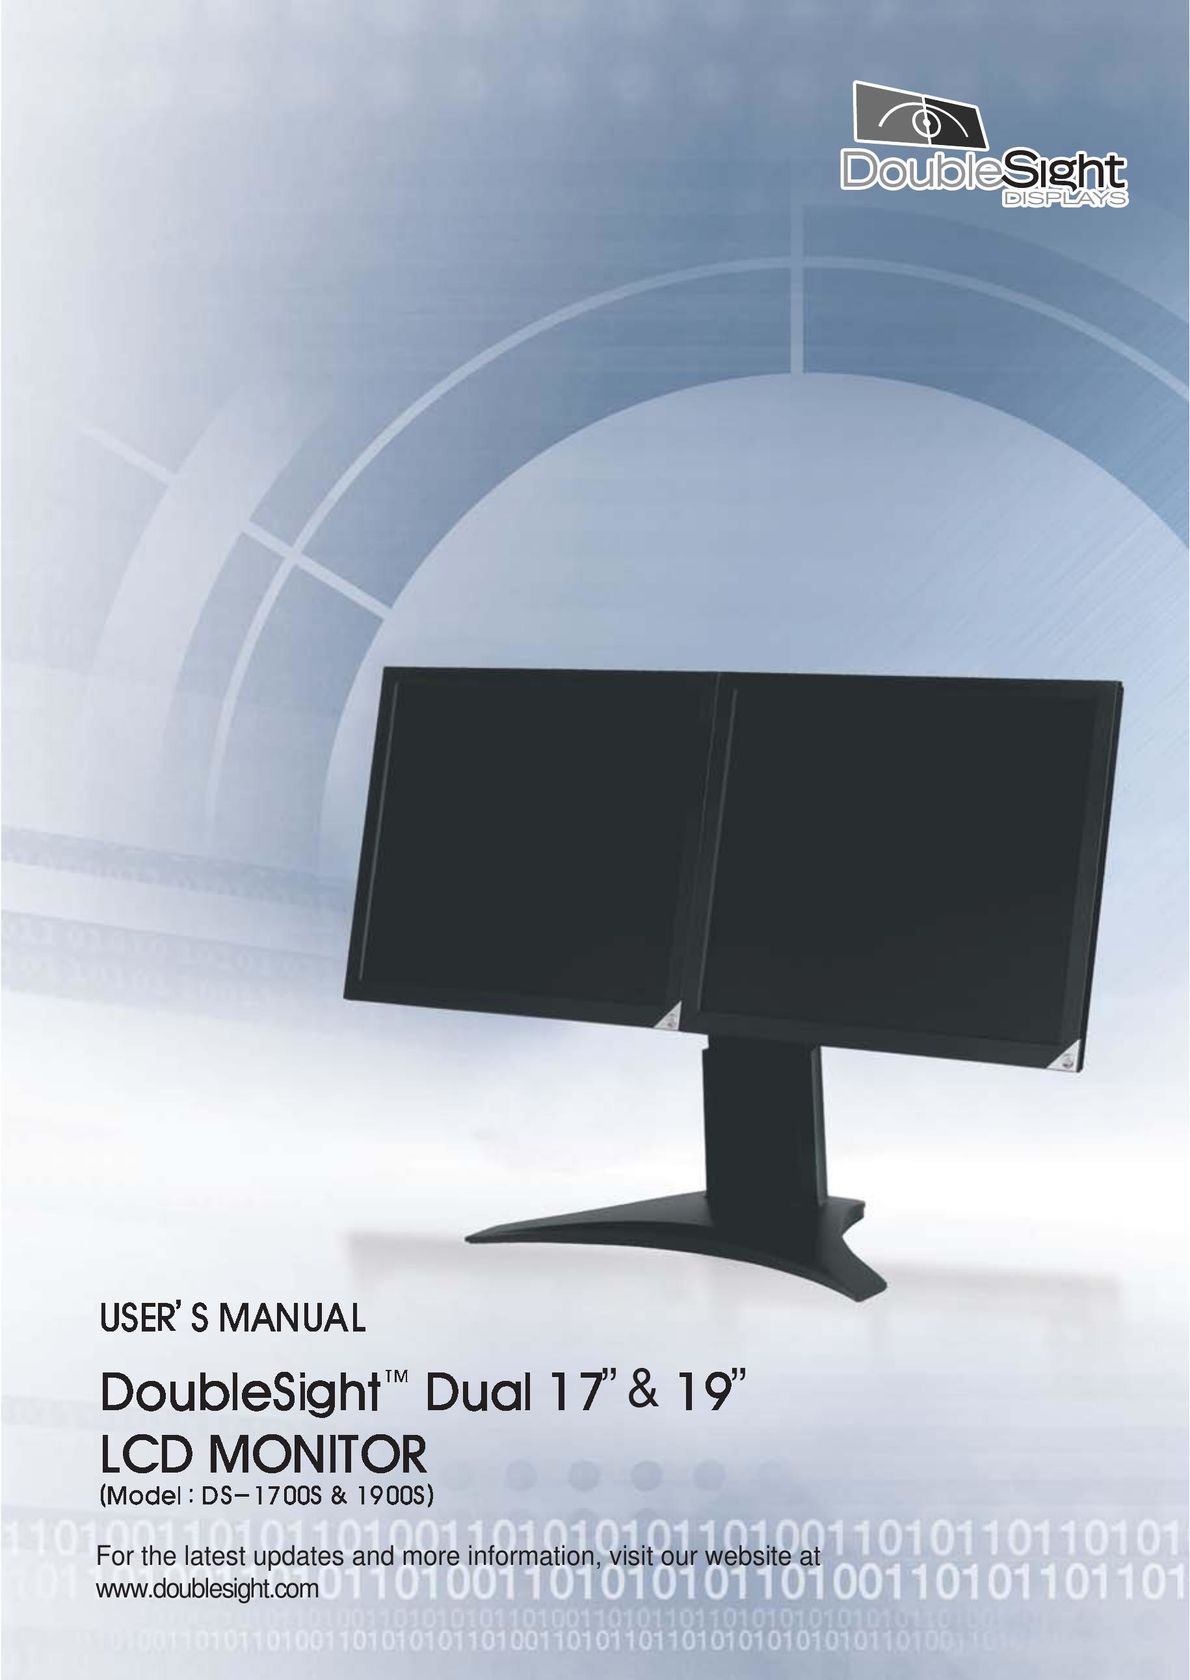 DoubleSight Displays DS-1900S Computer Monitor User Manual